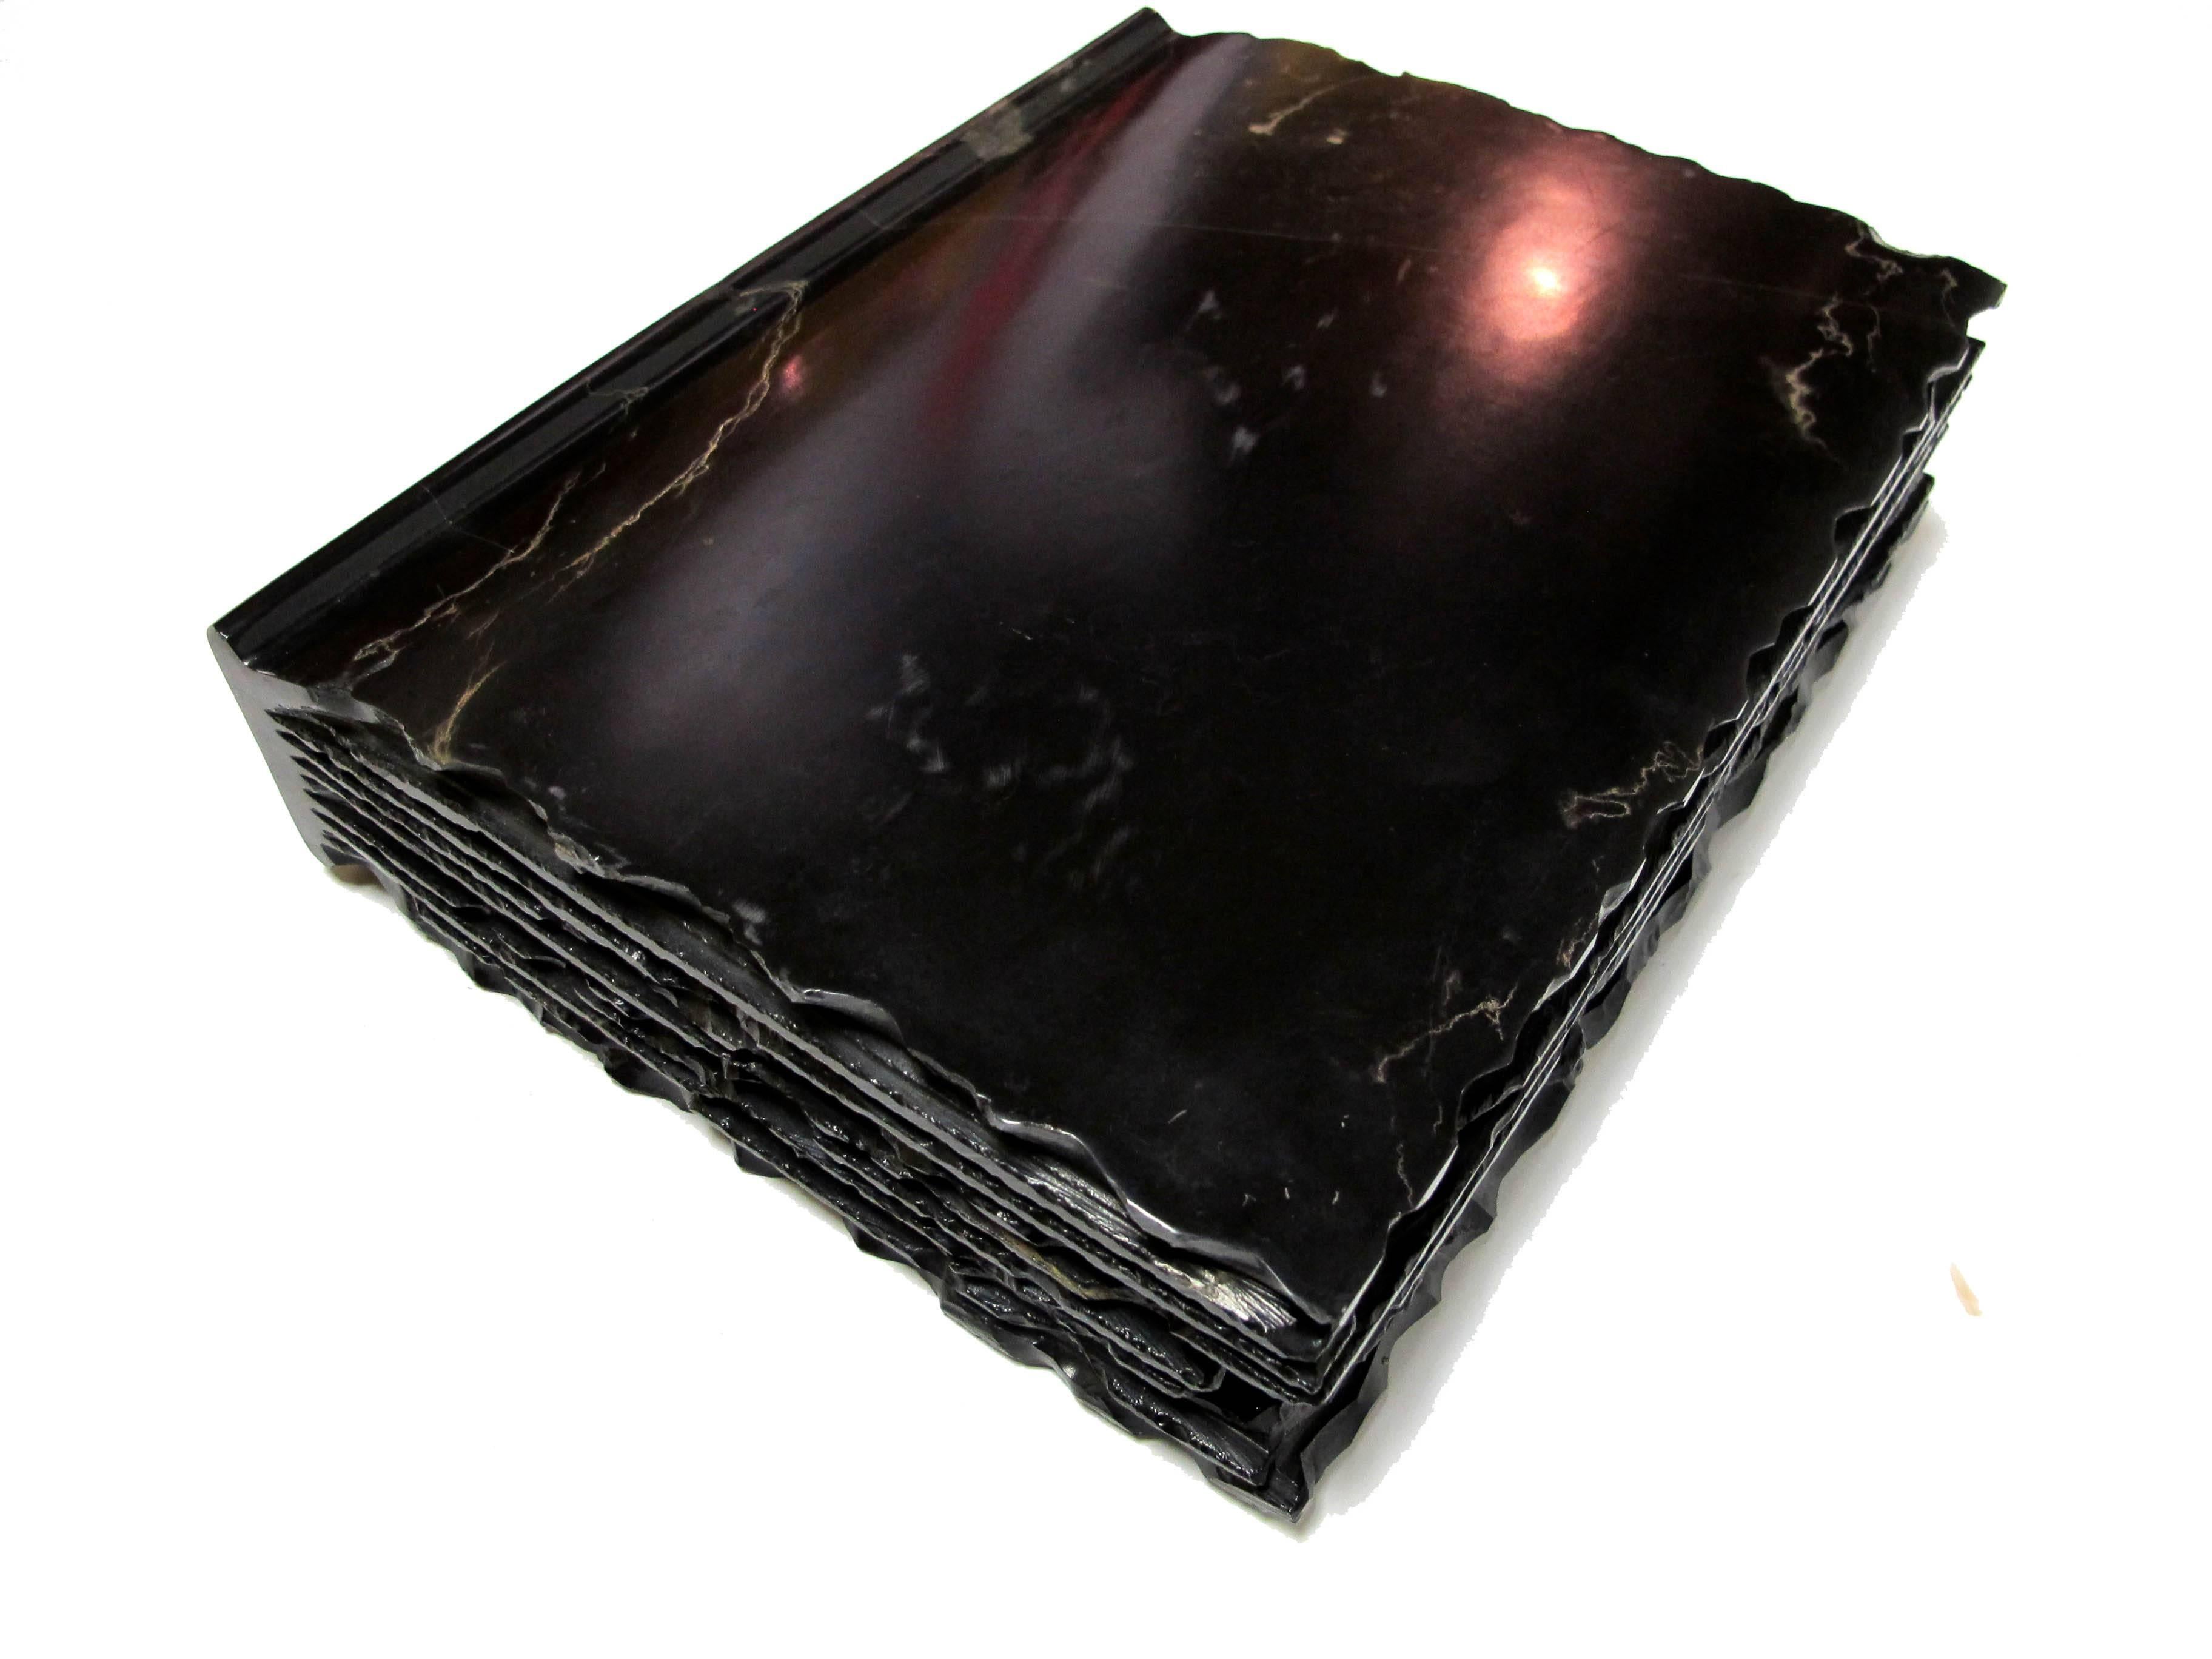 This is a gorgeous hand-carved black marble book. The marble is polished and with an amazing tactile feel. The weight and the feeling of the polished marble is the best. 

This piece is celebrates our connection to books and reminds us of the